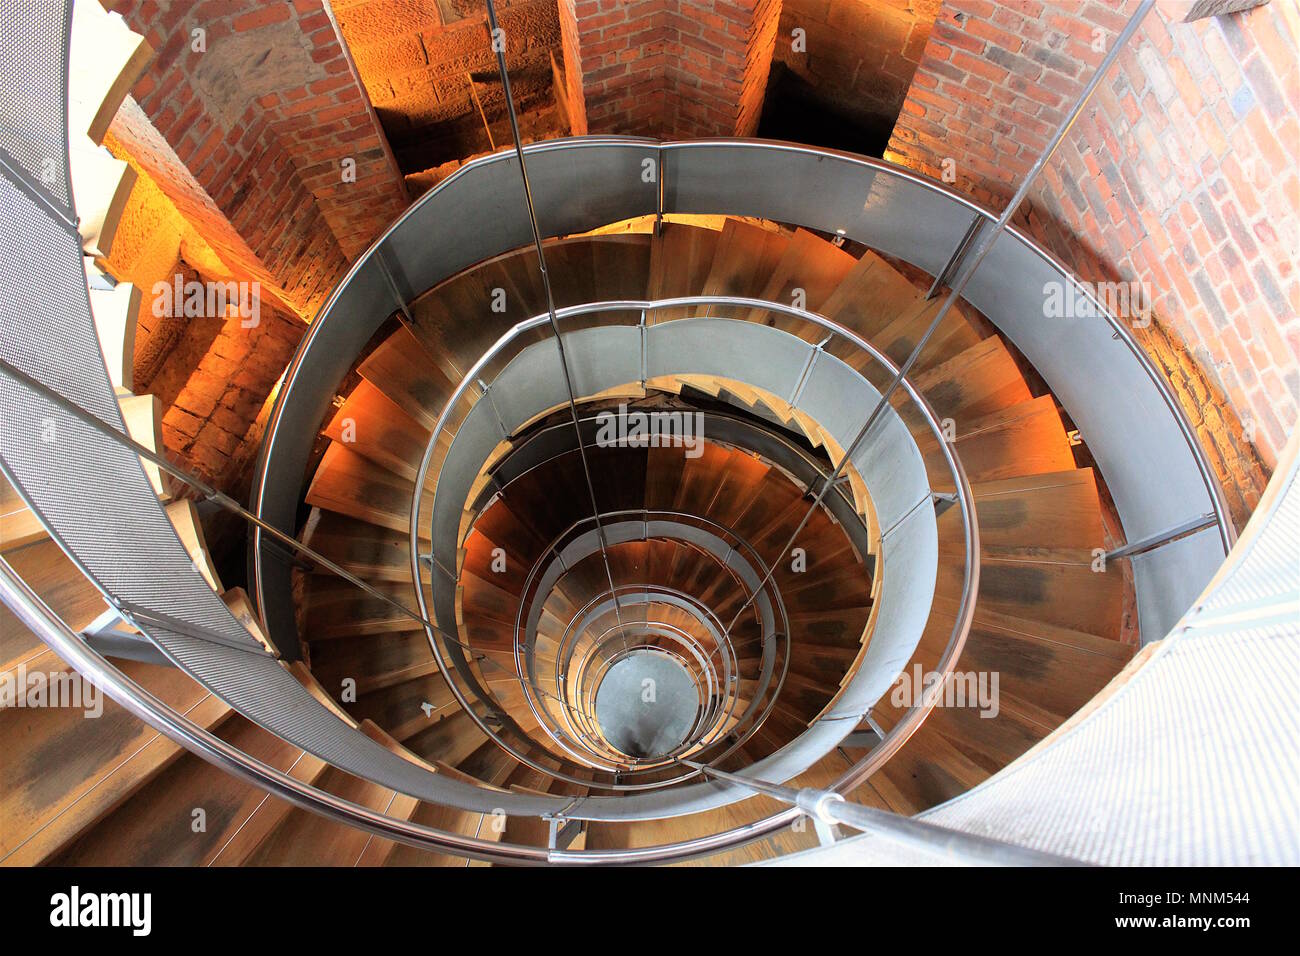 The spiral, helical staircase in the Lighthouse, Glasgow leading up to the original water tower Stock Photo